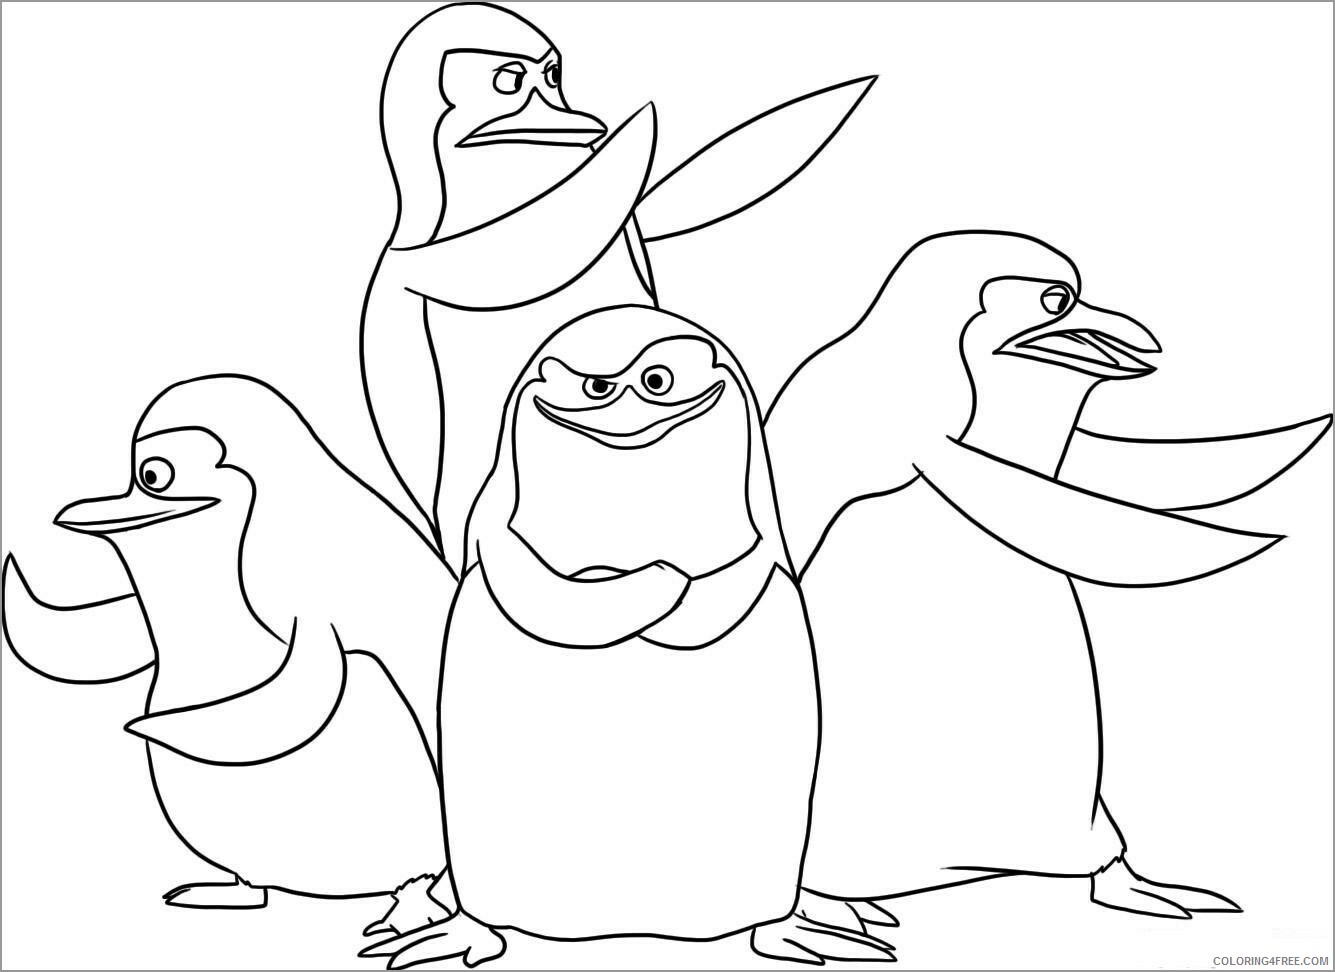 The Penguins of Madagascar Coloring Pages TV Film Printable 2020 09448 Coloring4free